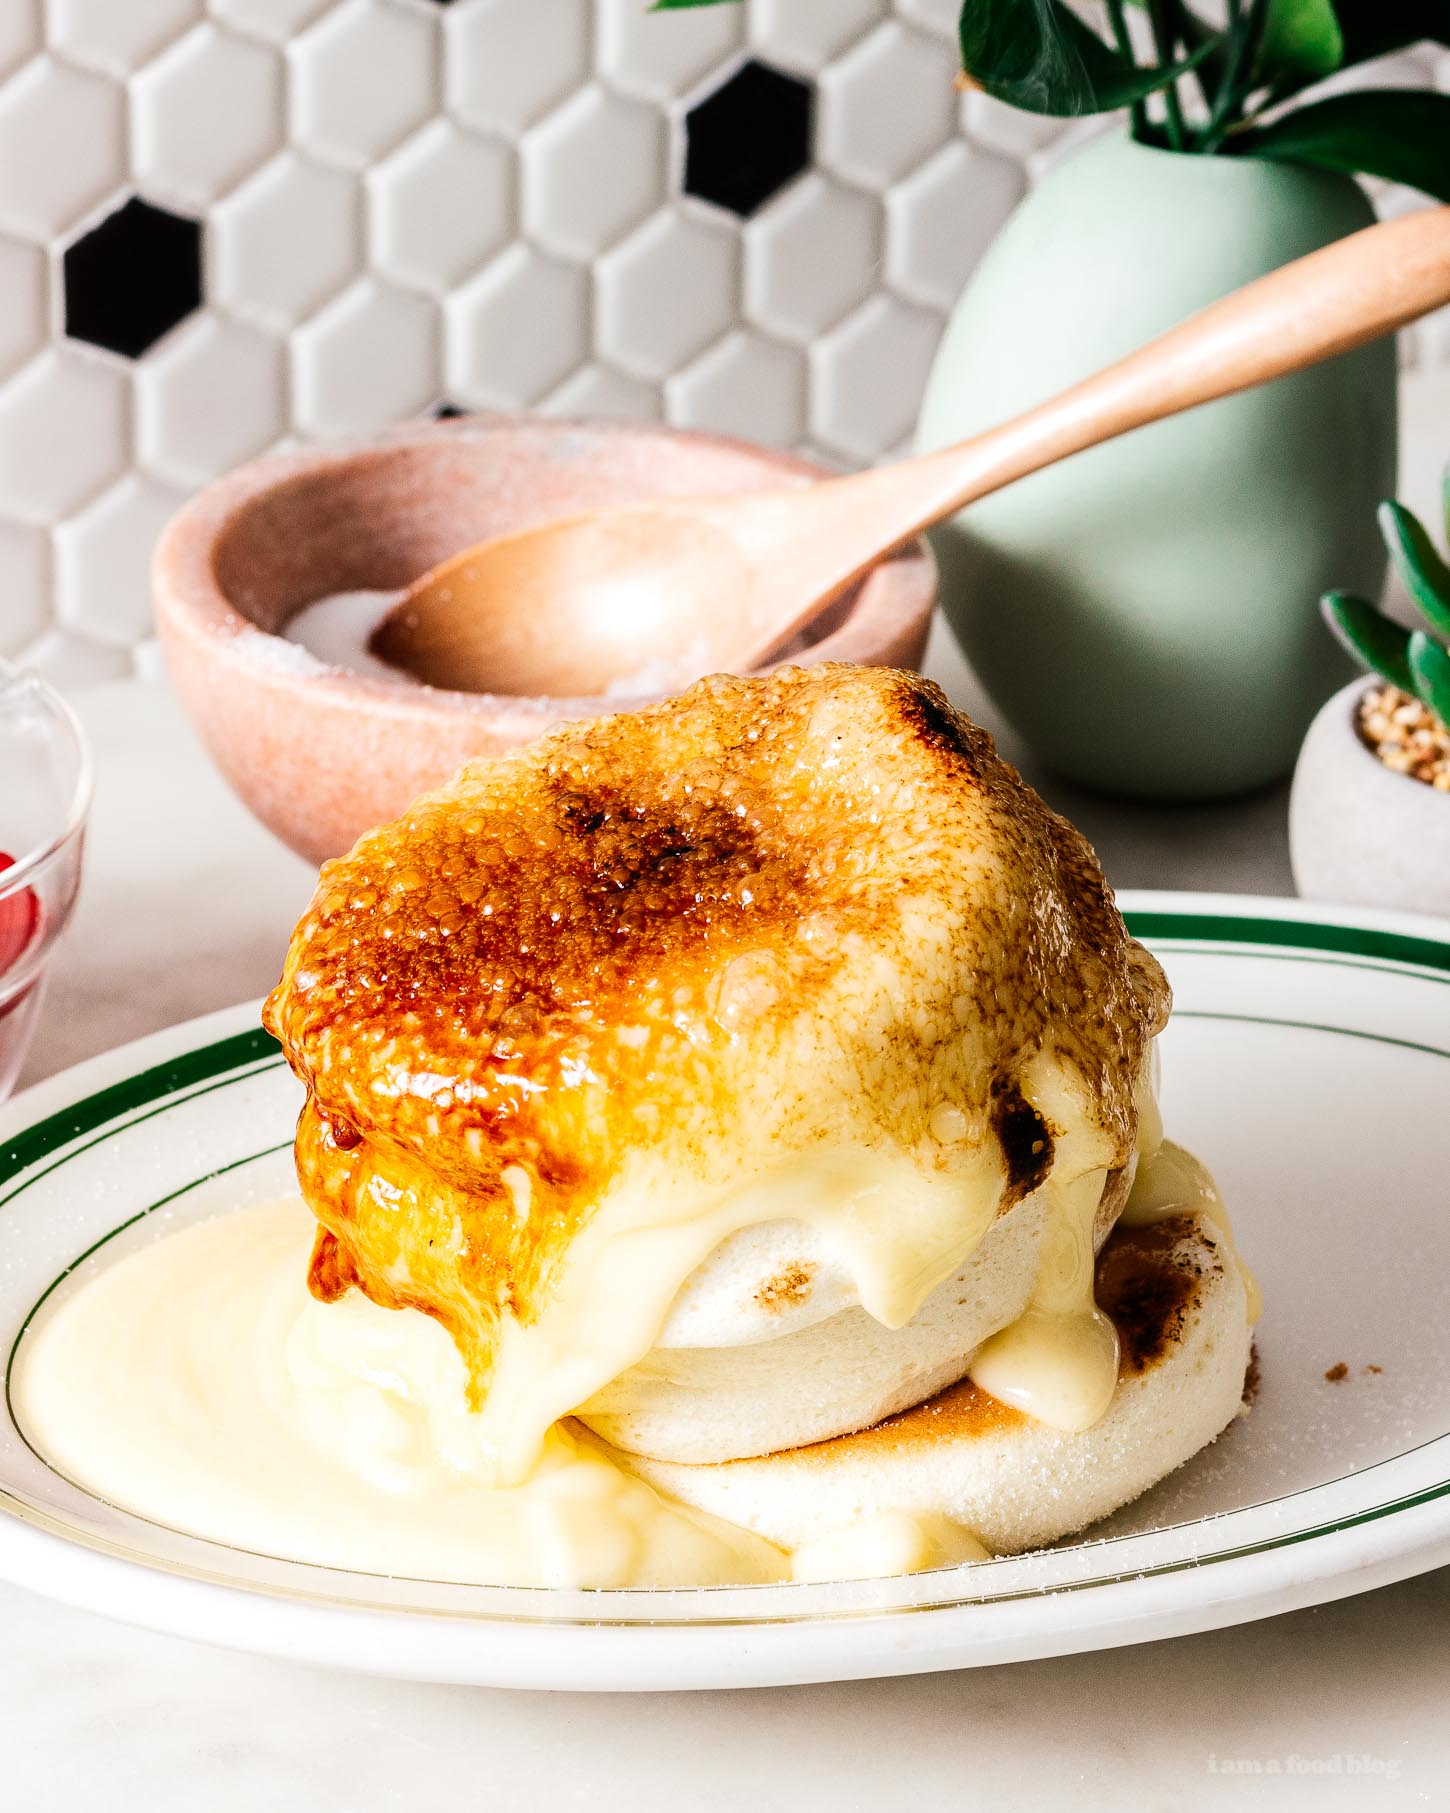 Do you want to eat fluffy Japanese soufflé creme brûlée pancakes but don’t want to fly to Hong Kong or wait in a line for hours? This recipe is for you! Make the fluffy pancakes of your dreams, tall and fluffy with a creme brûlée crackling sugar crust. #pancakes #japanesepancakes #soufflepancakes #recipes #brunch